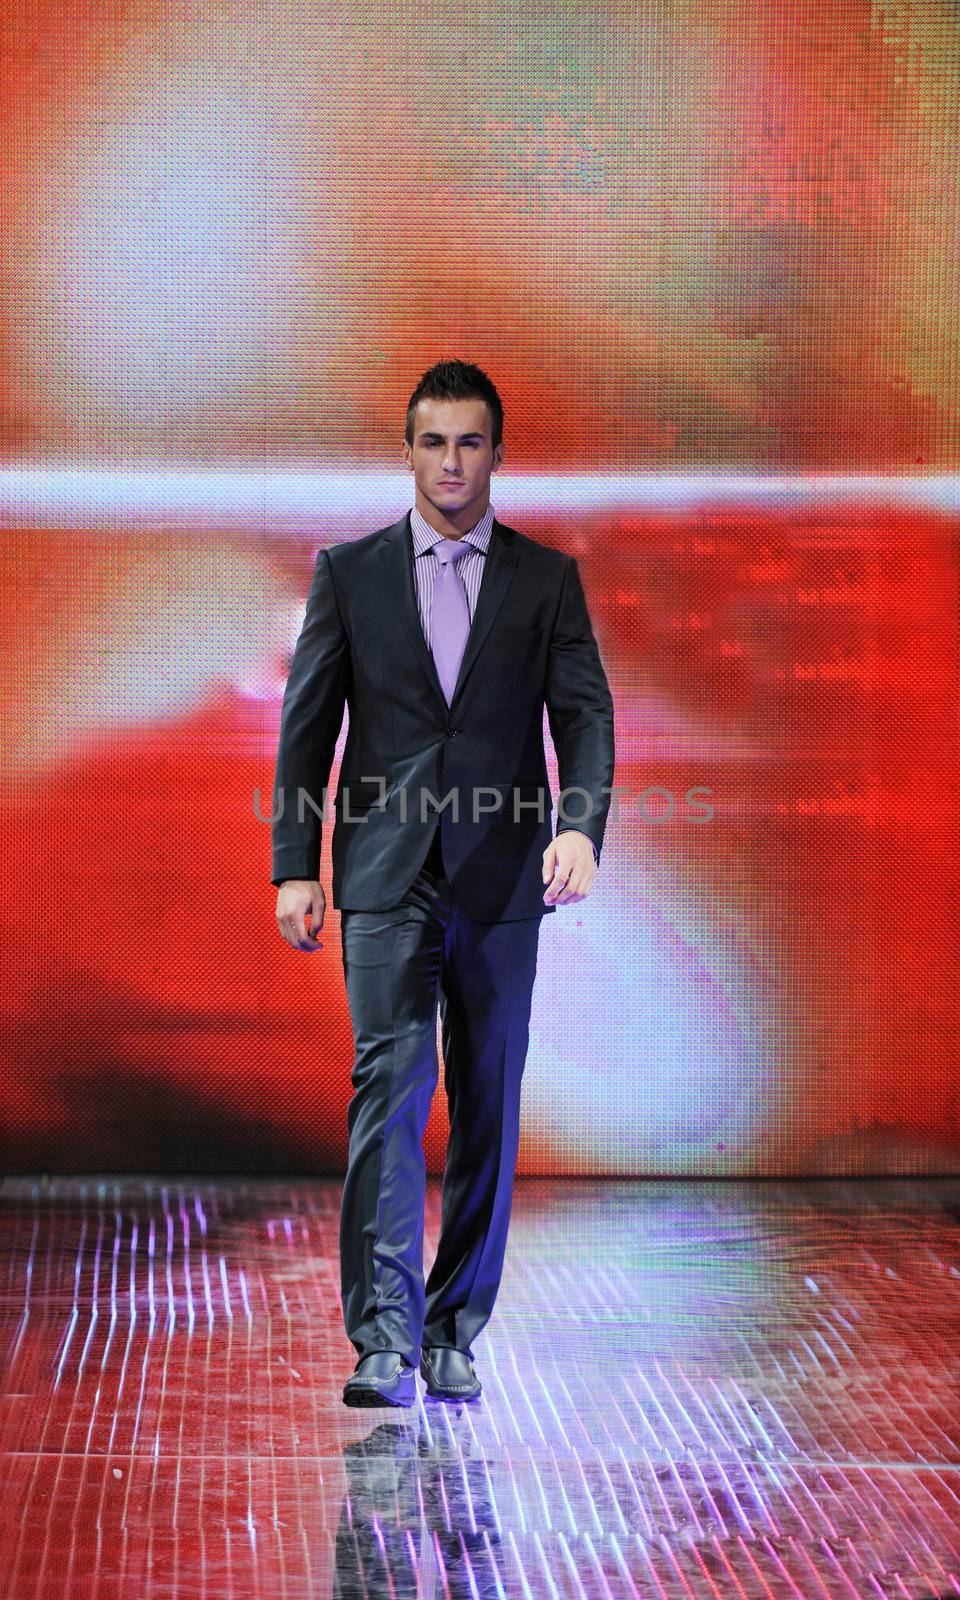 handsome man male model at fashion show stage event